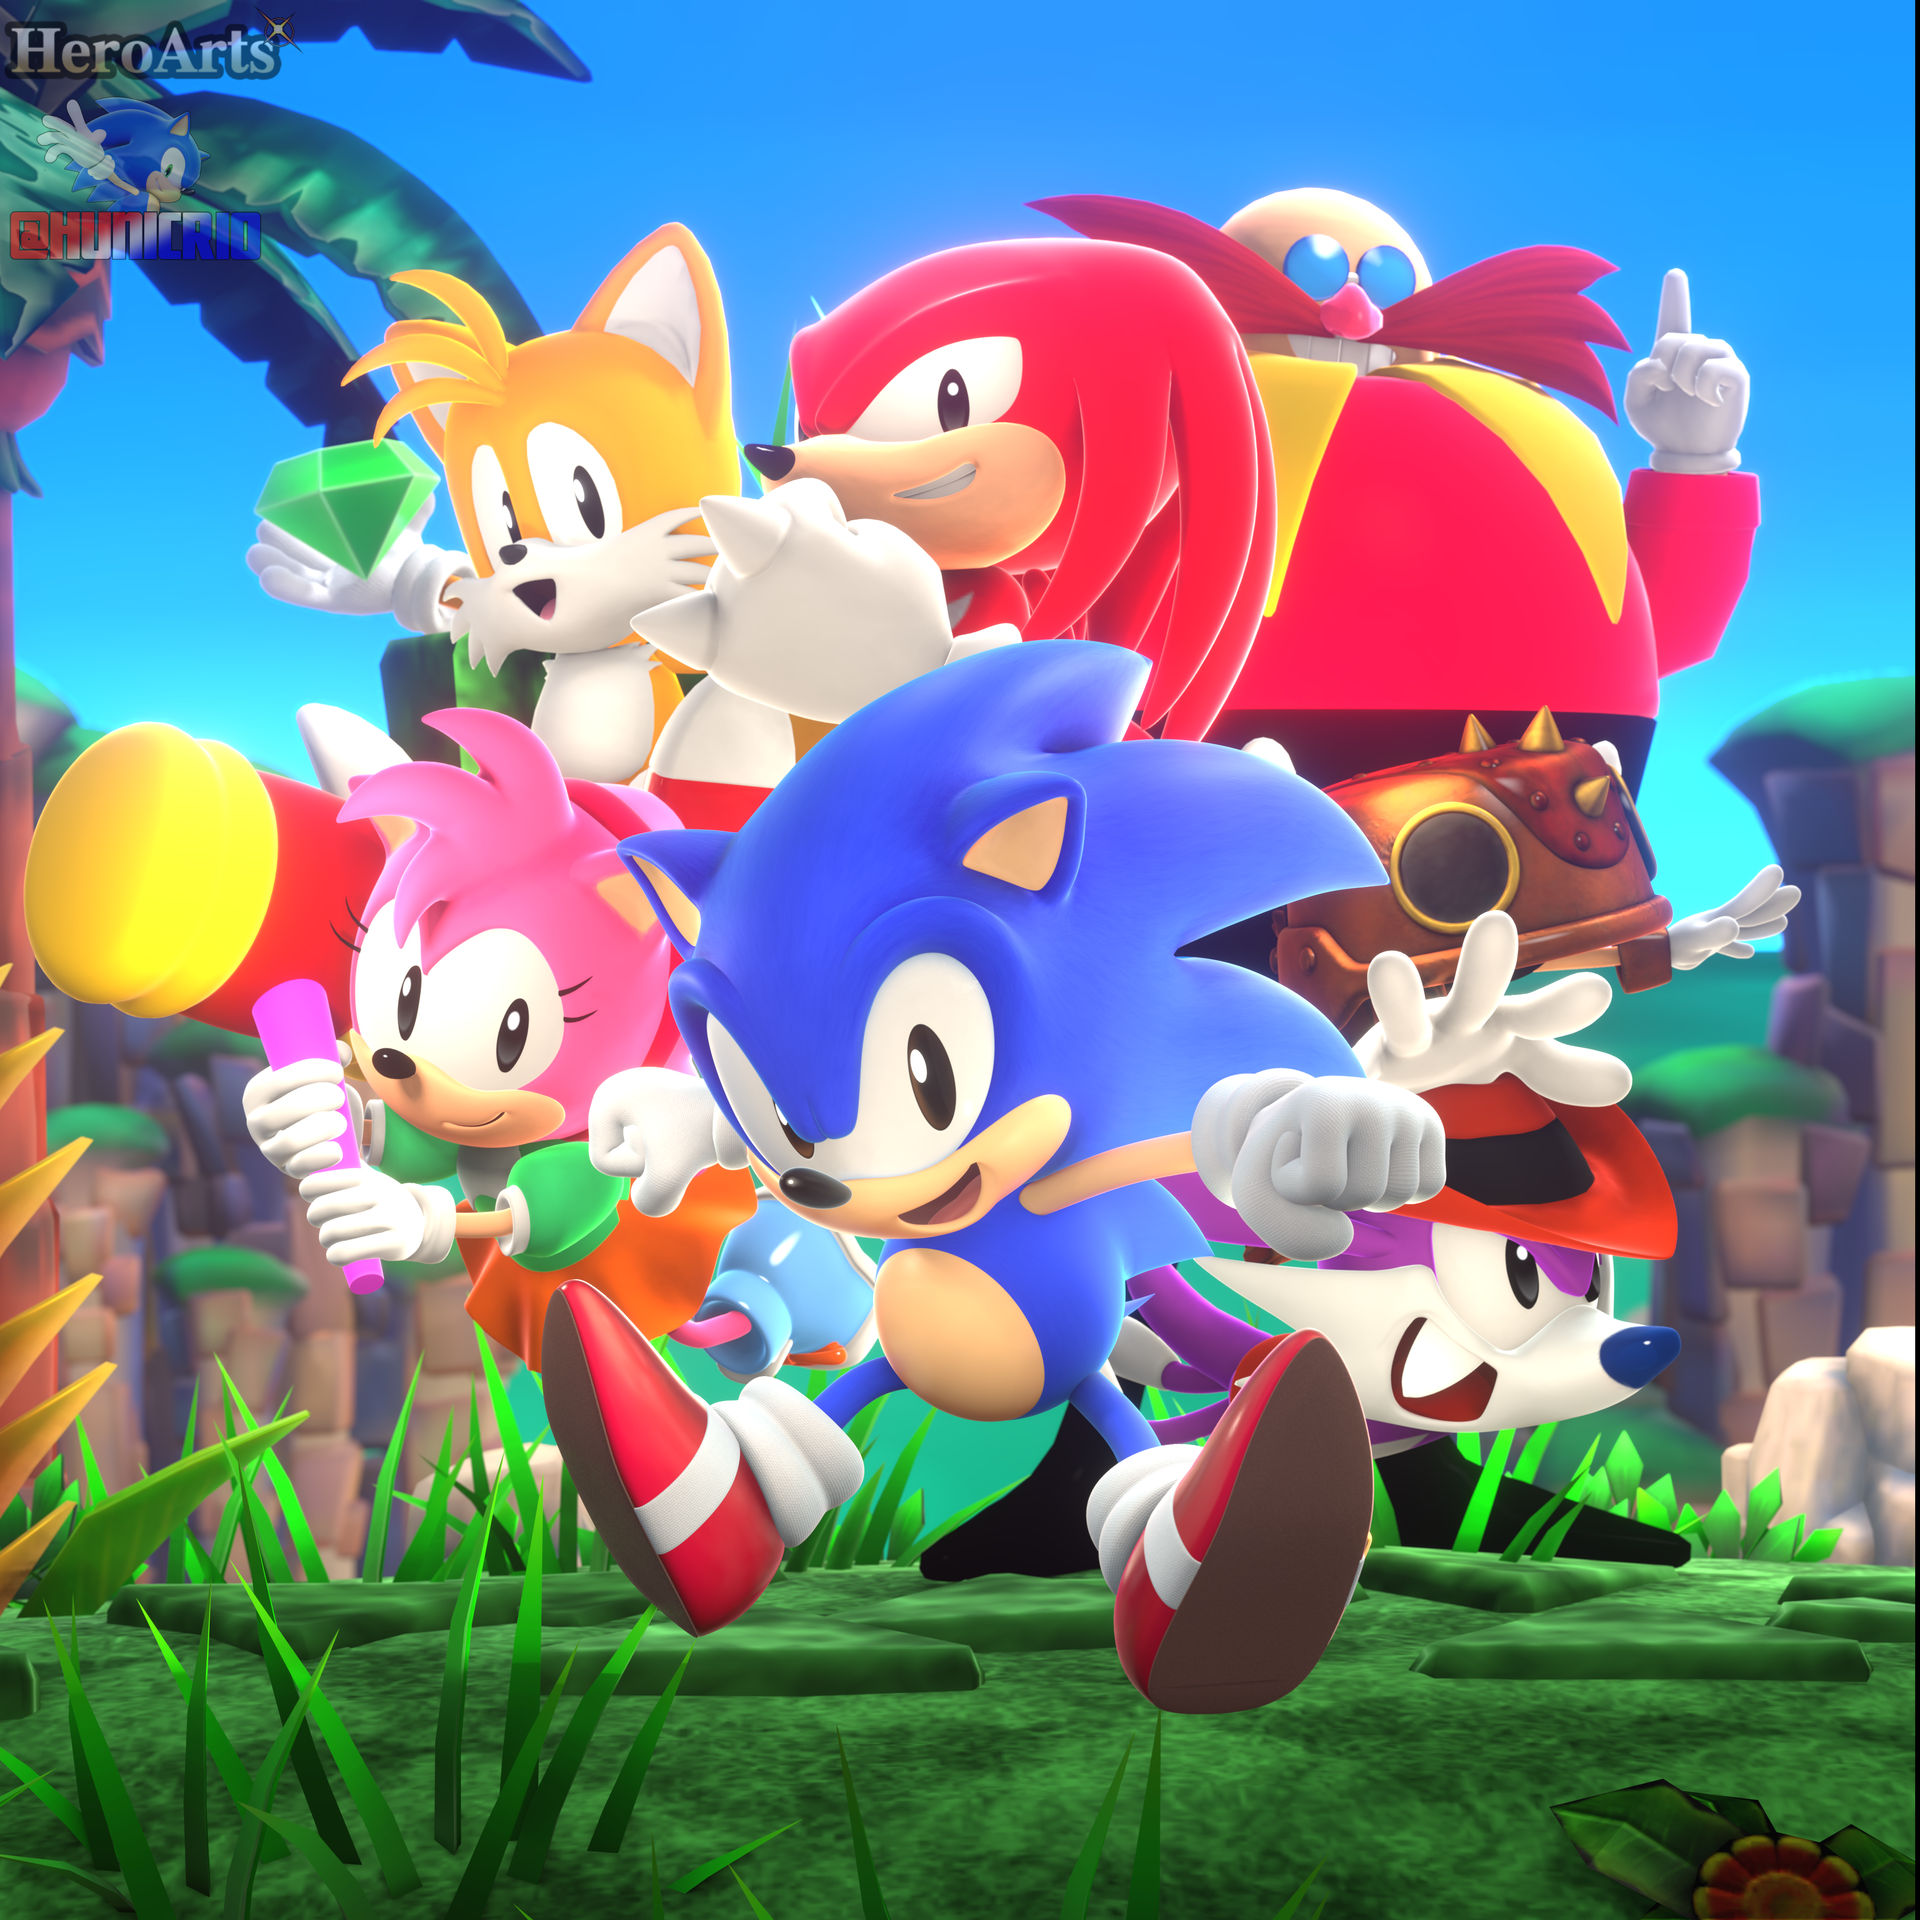 Let's Praise the Humans - The Unsung Heroes of SONIC THE HEDGEHOG